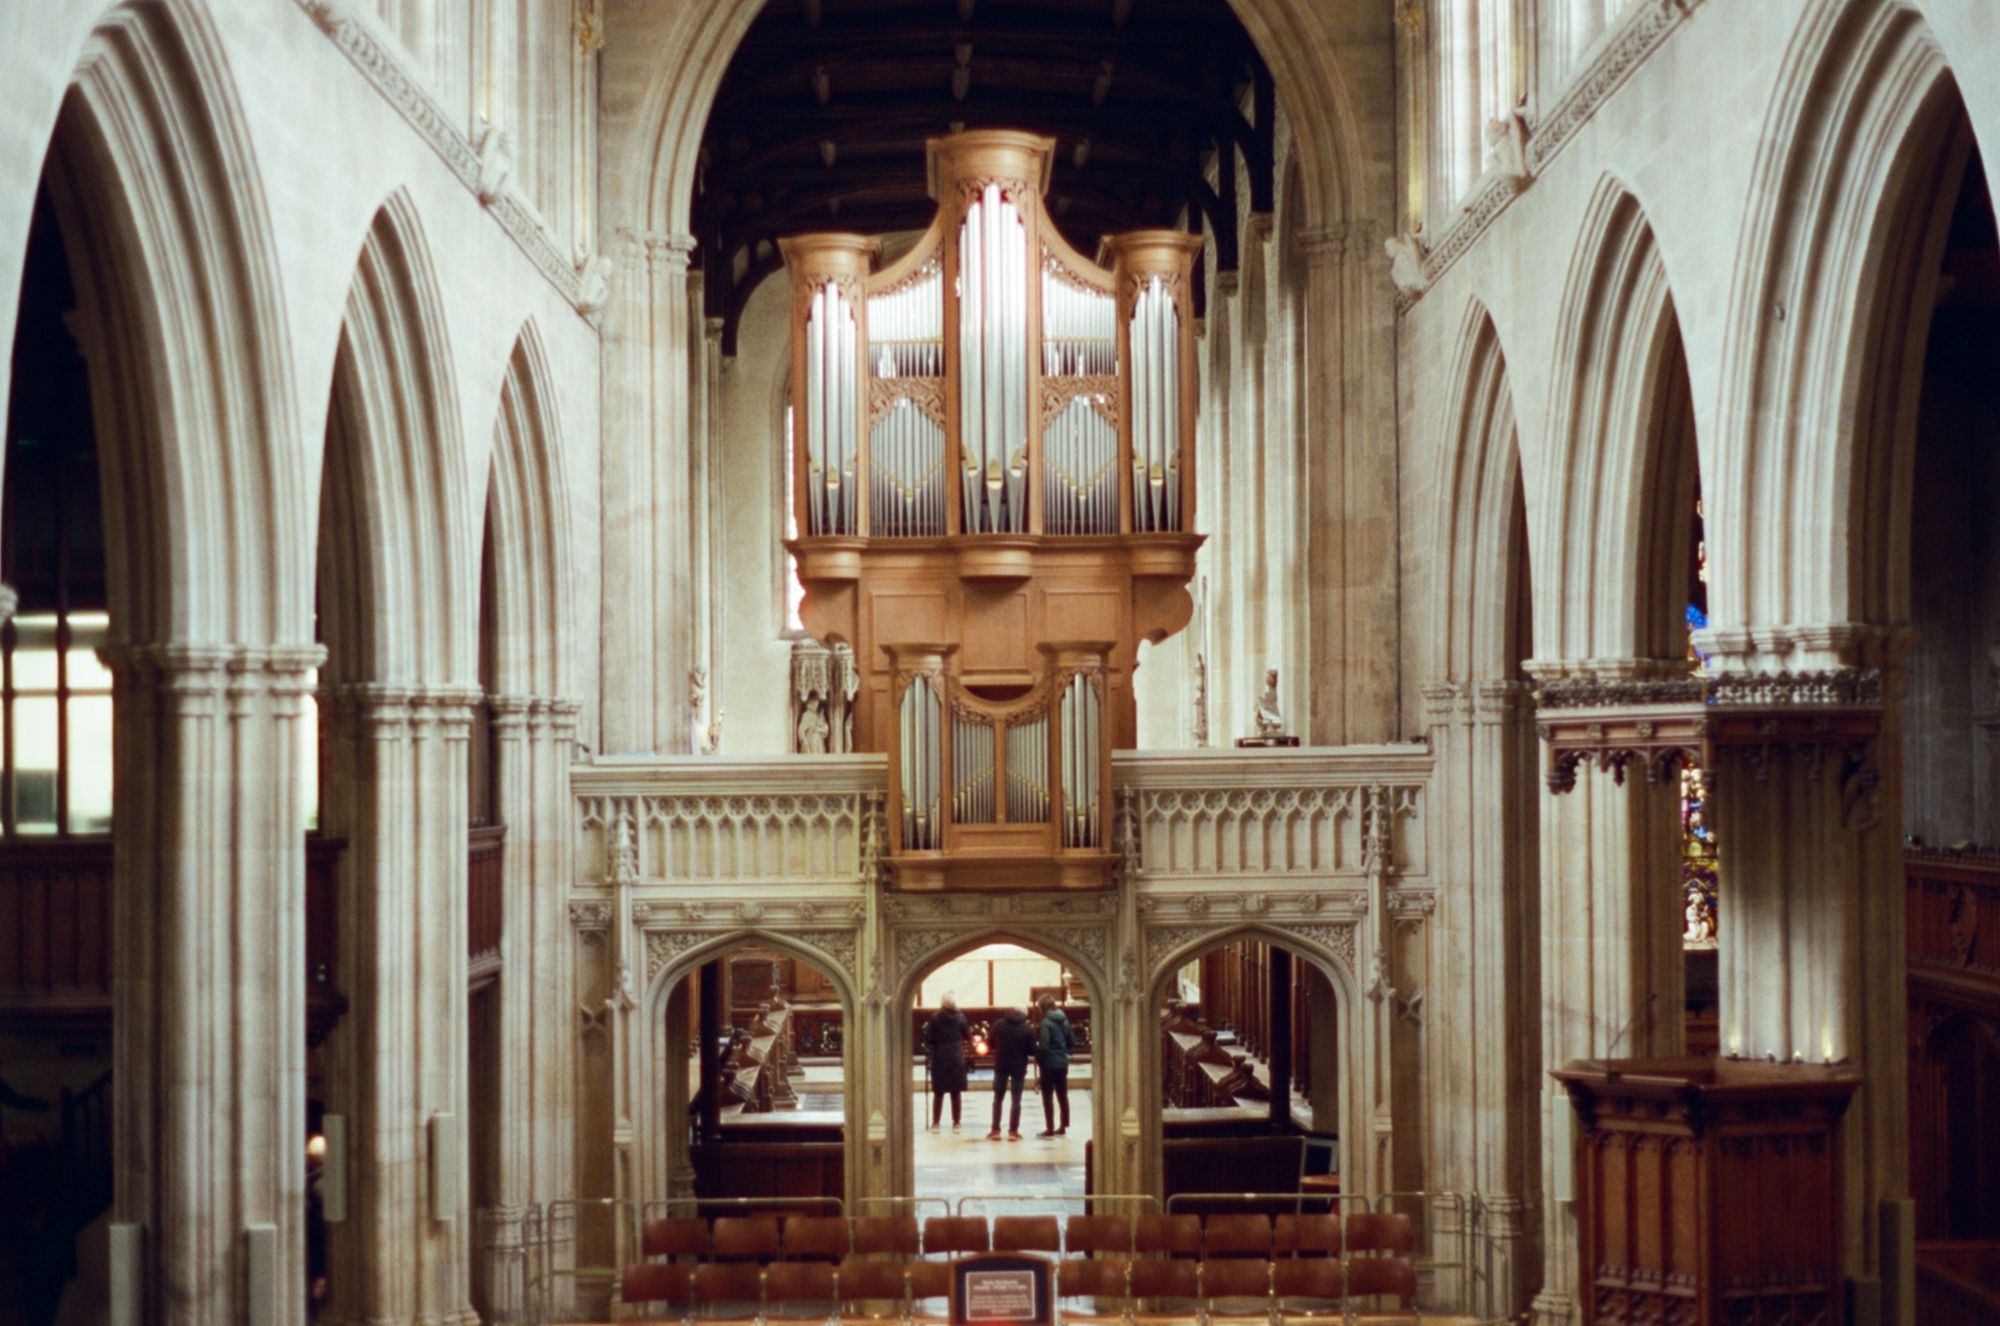 A grand pipe organ in an old church, its silver pipes gleaming.